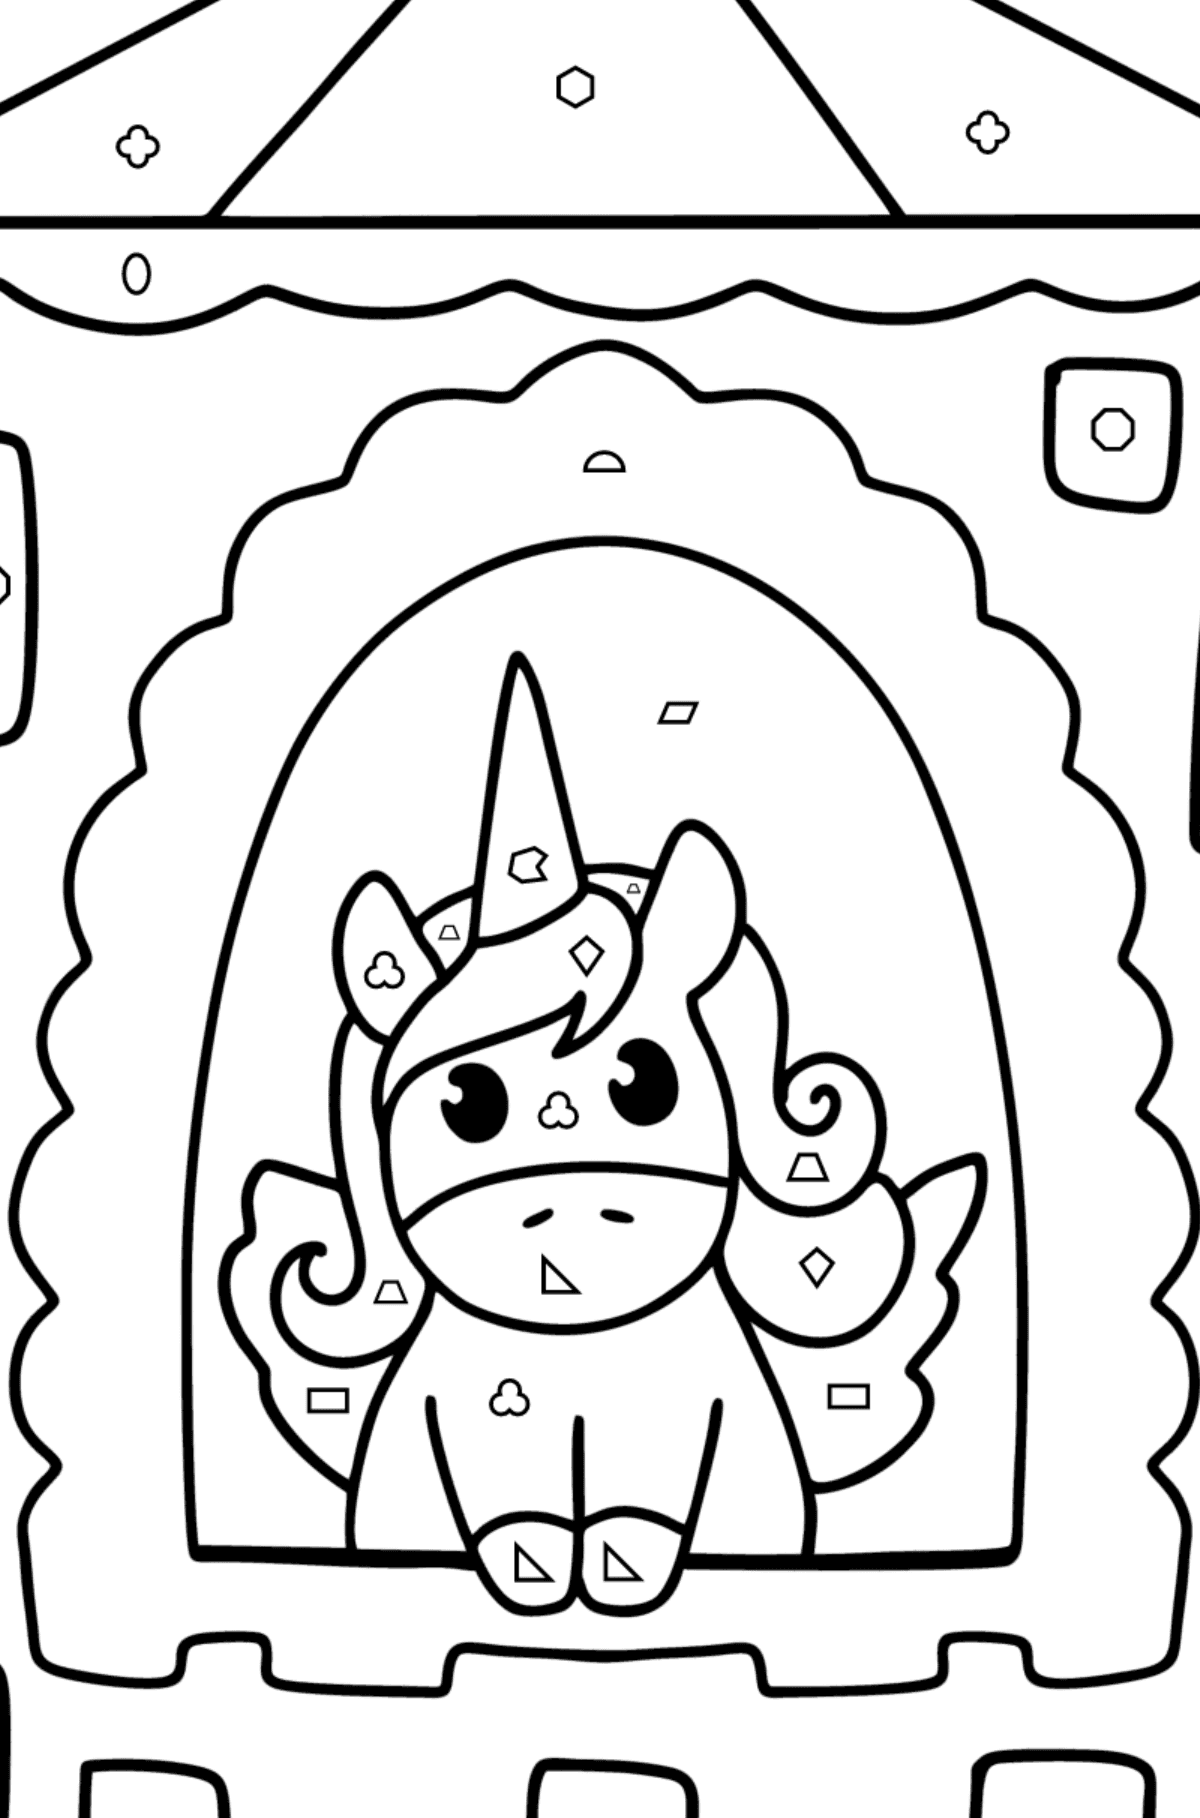 Unicorn in fairyland coloring page - Coloring by Geometric Shapes for Kids